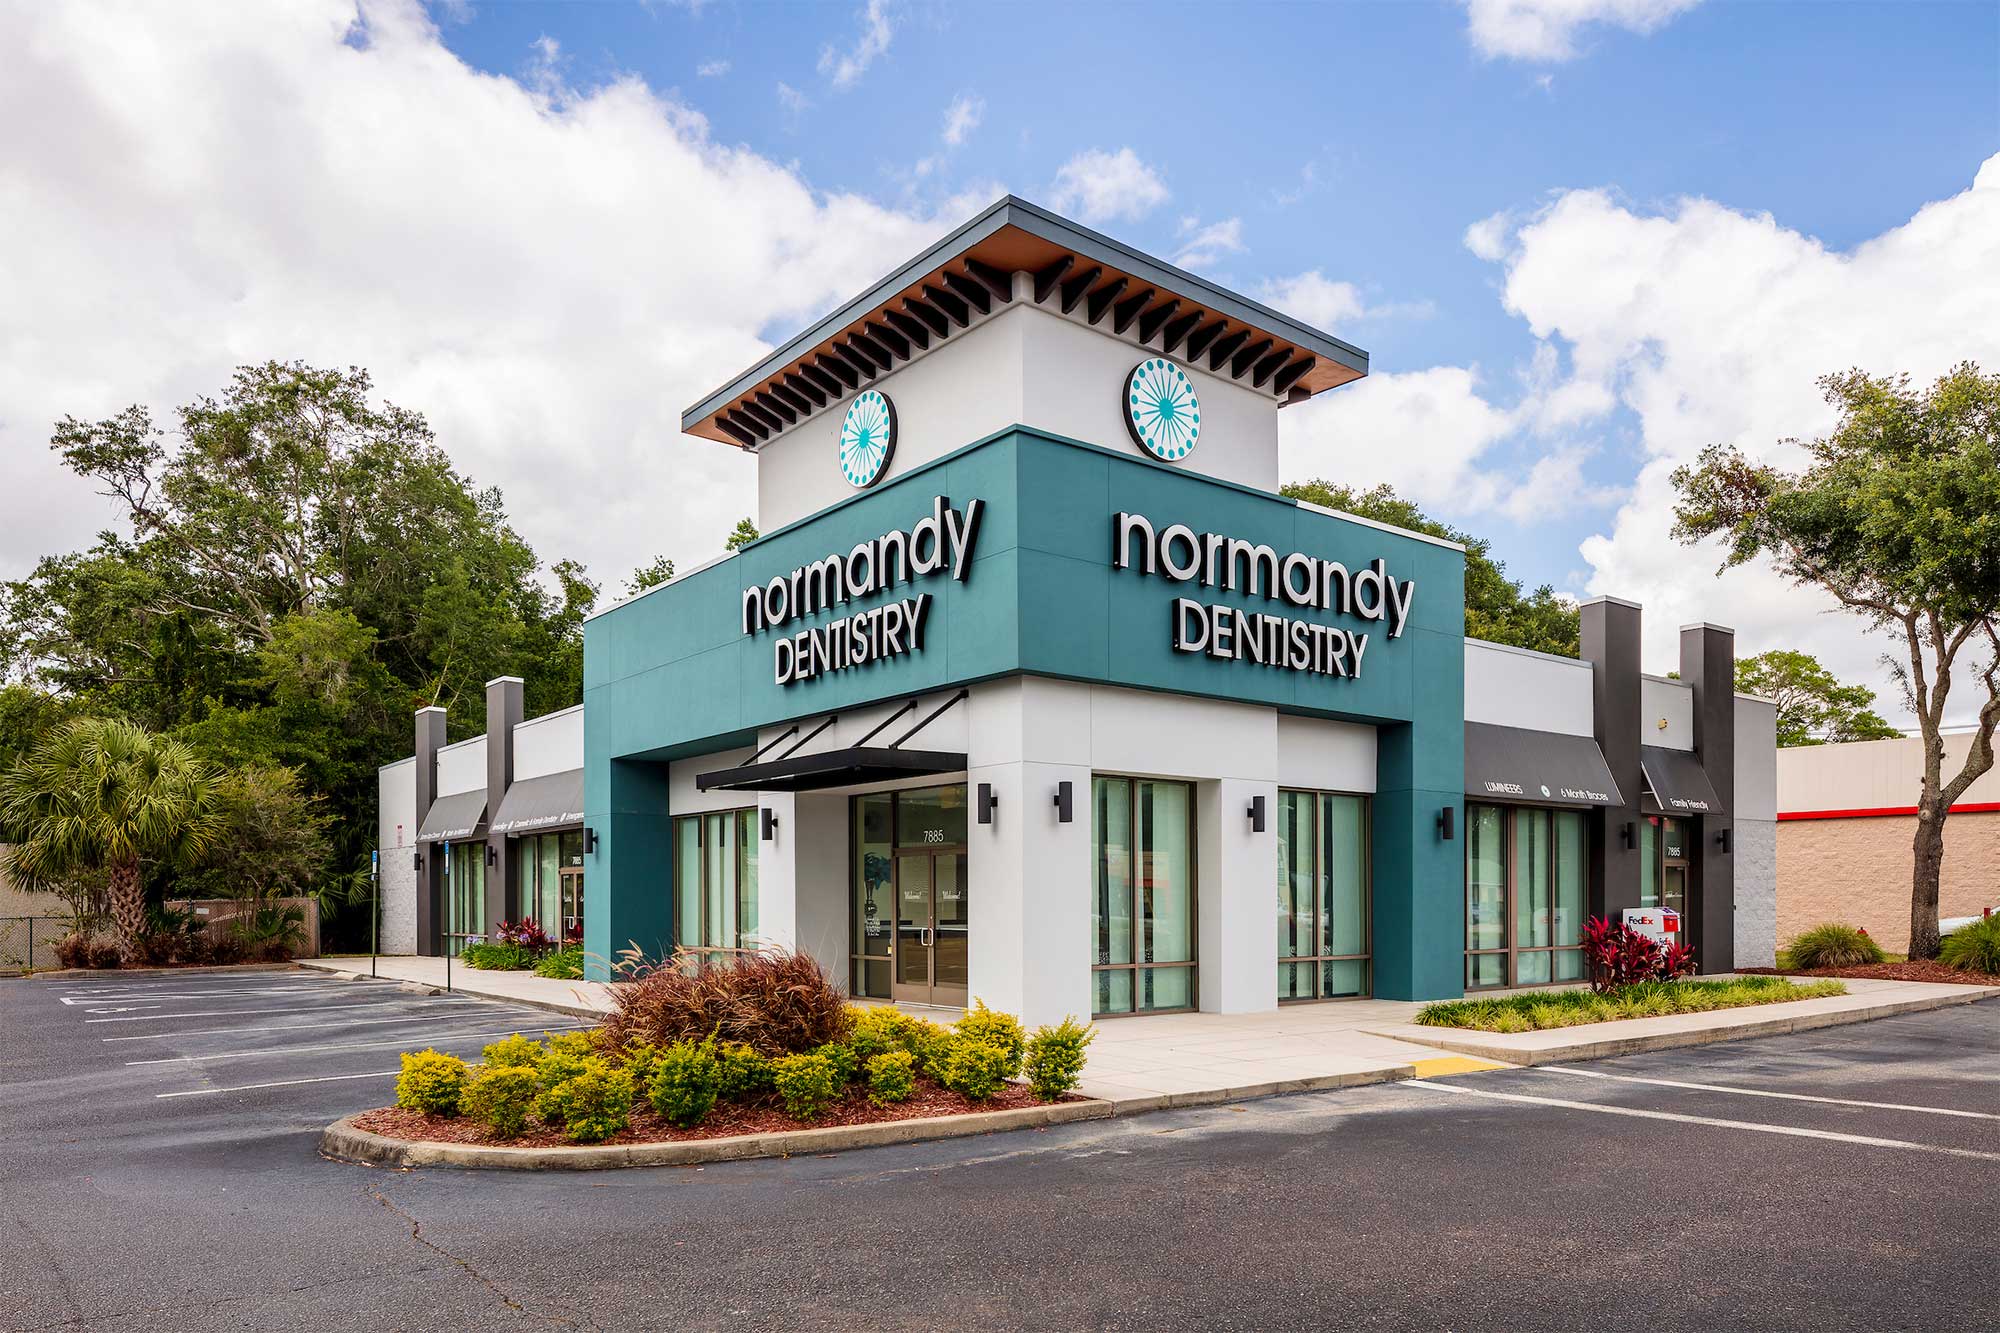 The Normandy Dentistry building in Jacksonville, Florida